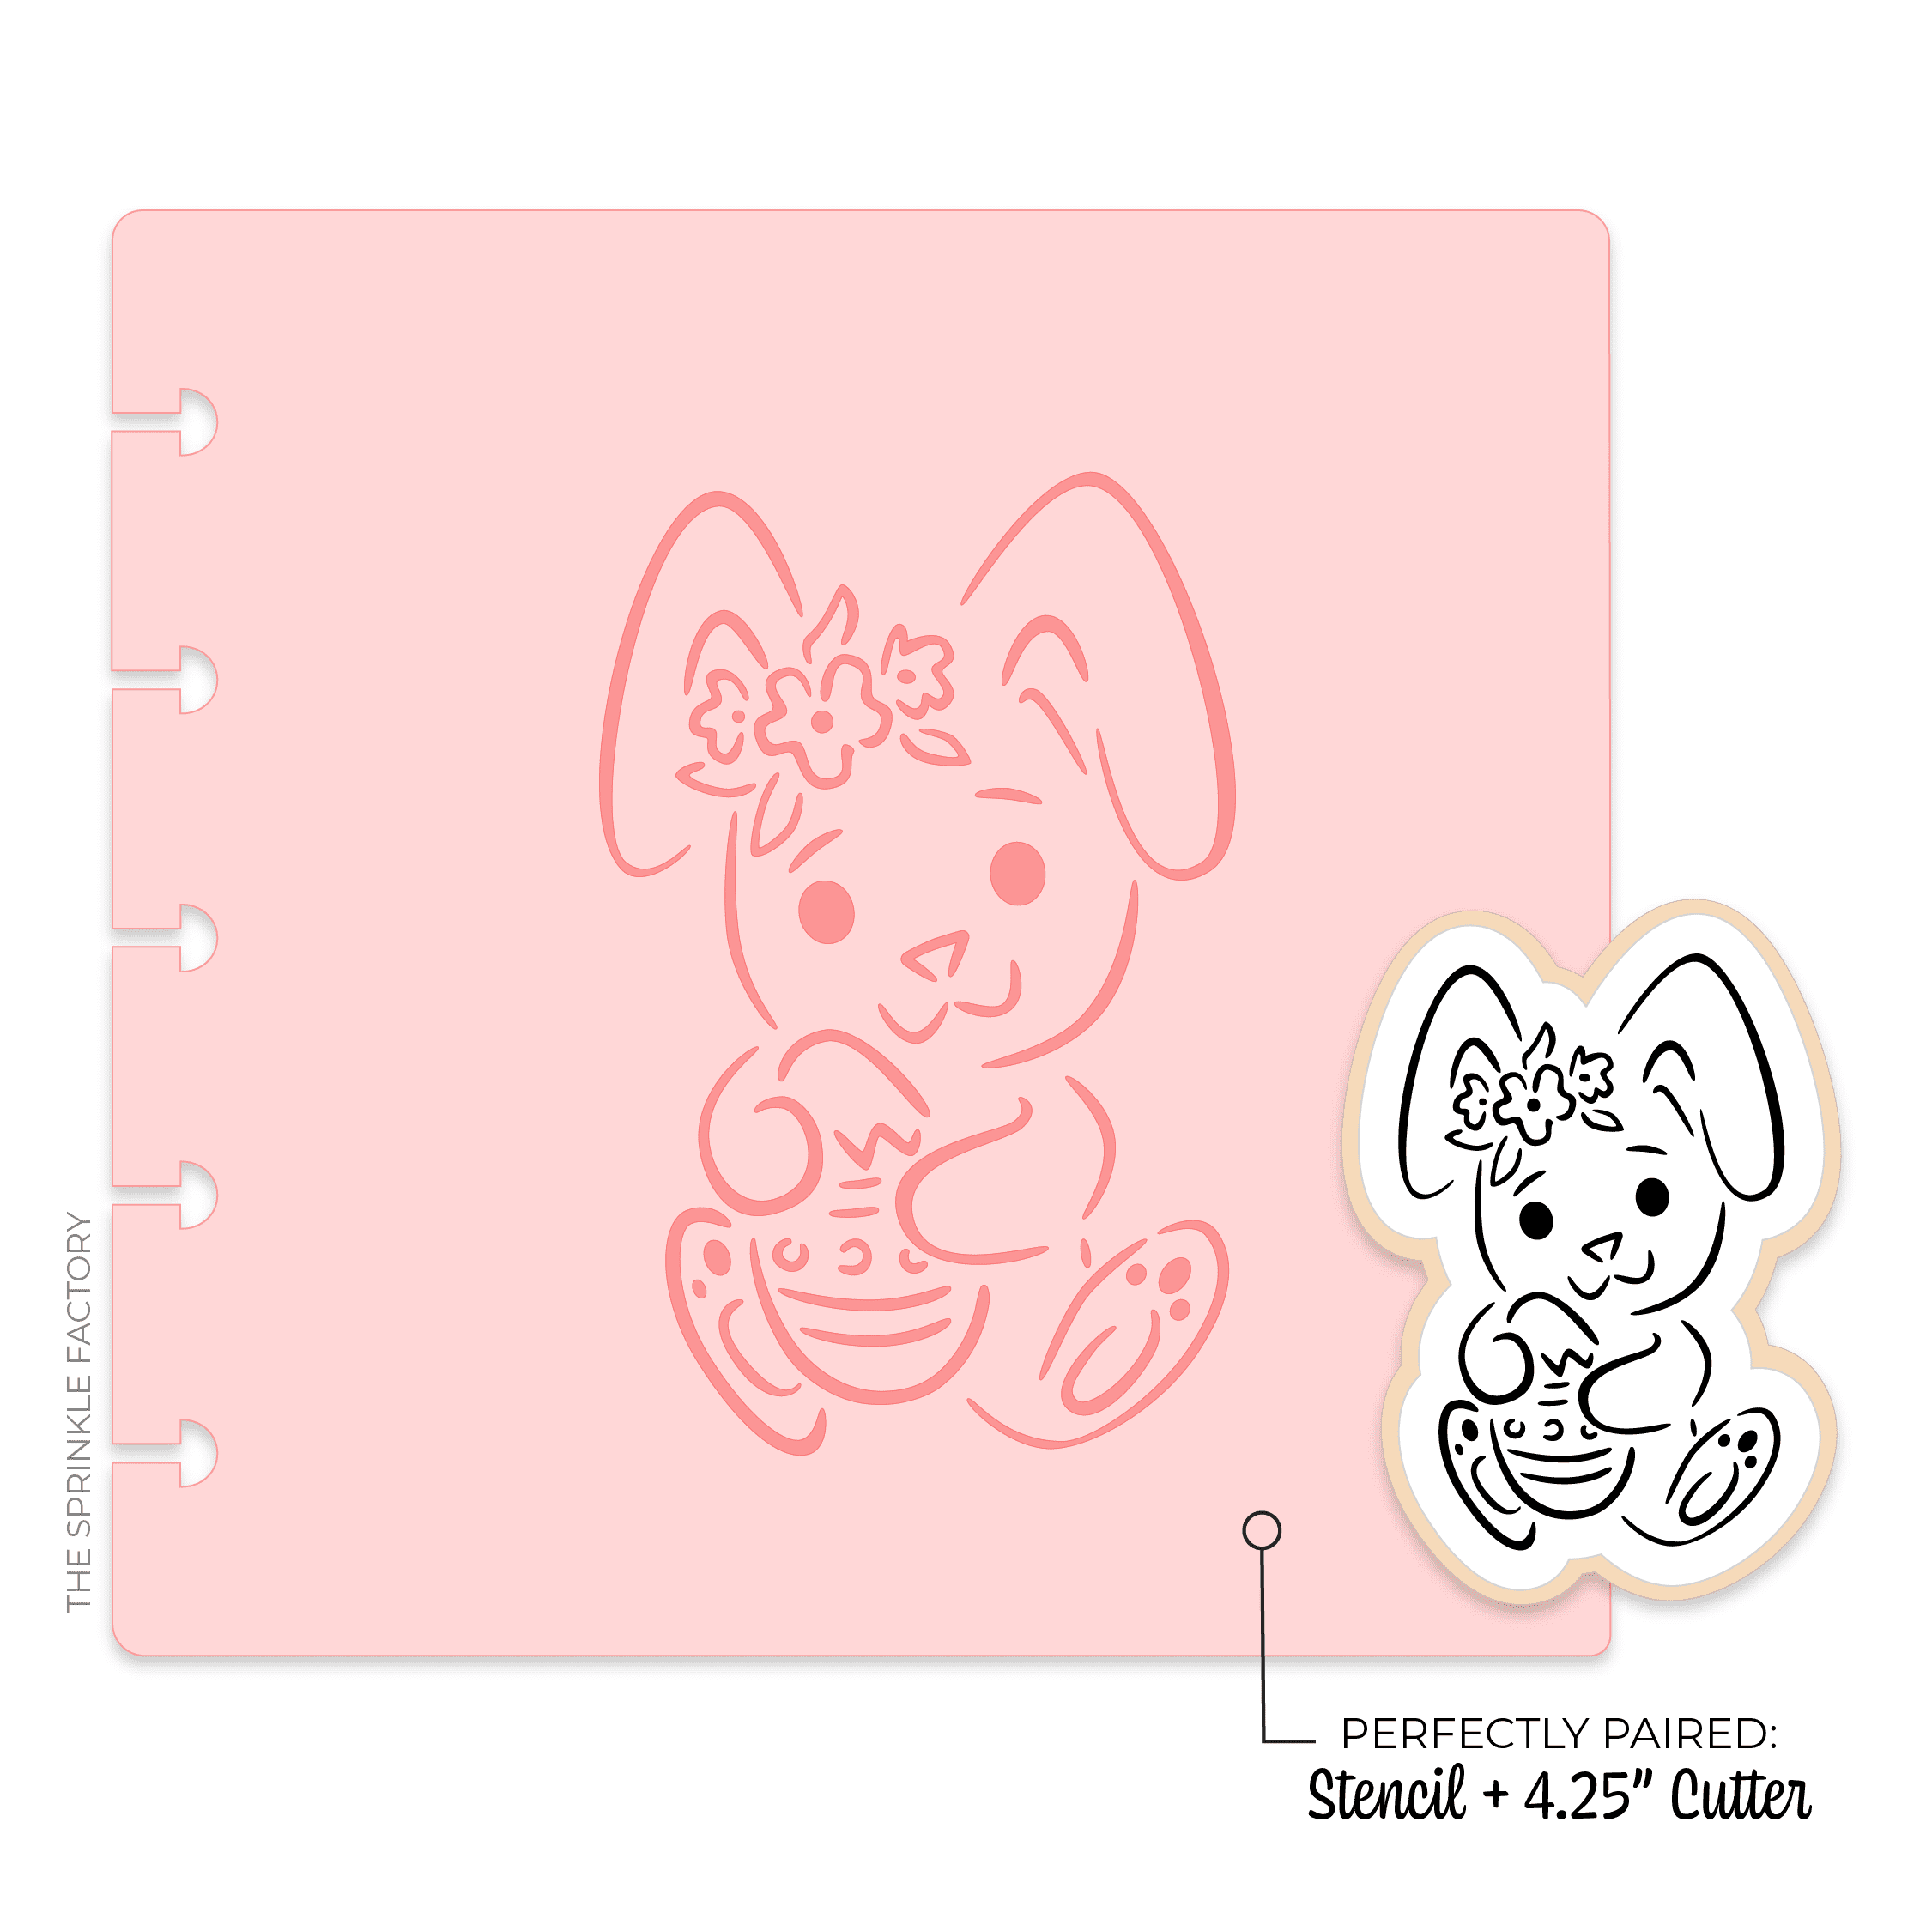 Clipart of a line drawing of a bunny holding an easter egg with flowers into of its left ear with pink stencil.